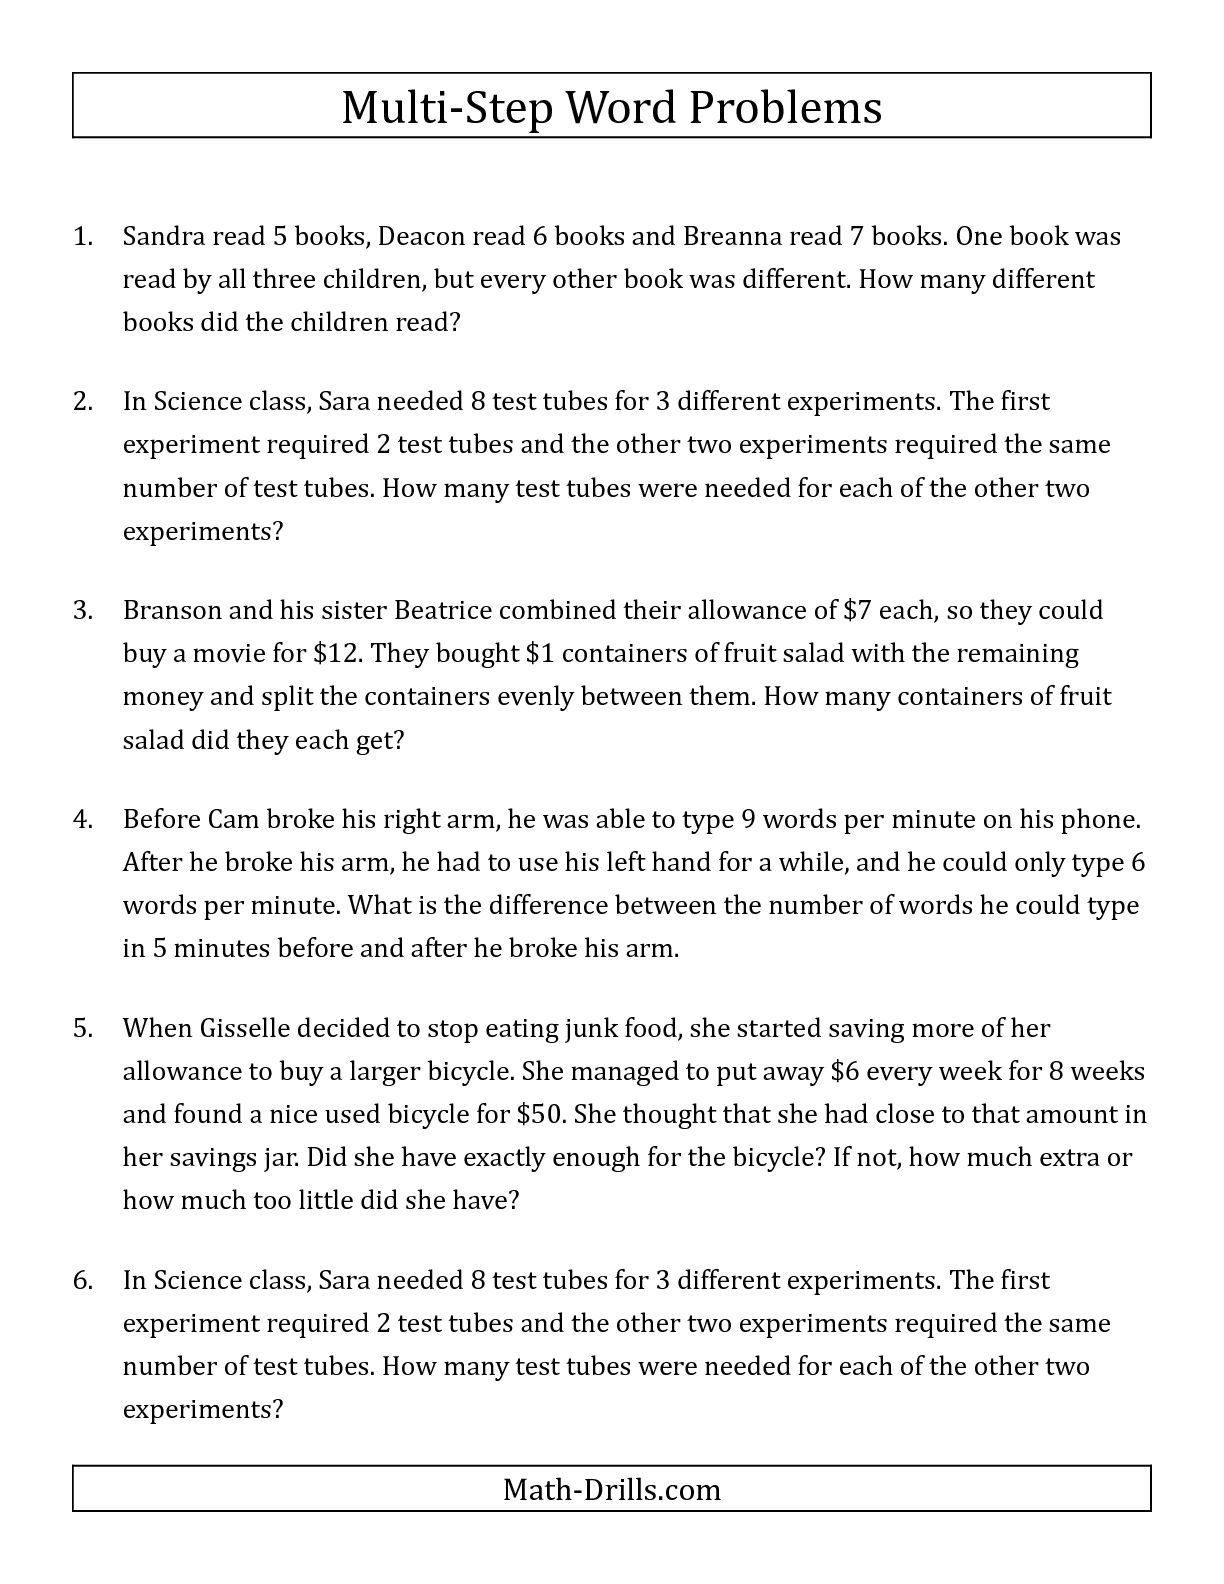 Linear Word Problems Worksheet the Easy Multi Step Word Problems Math Worksheet From the